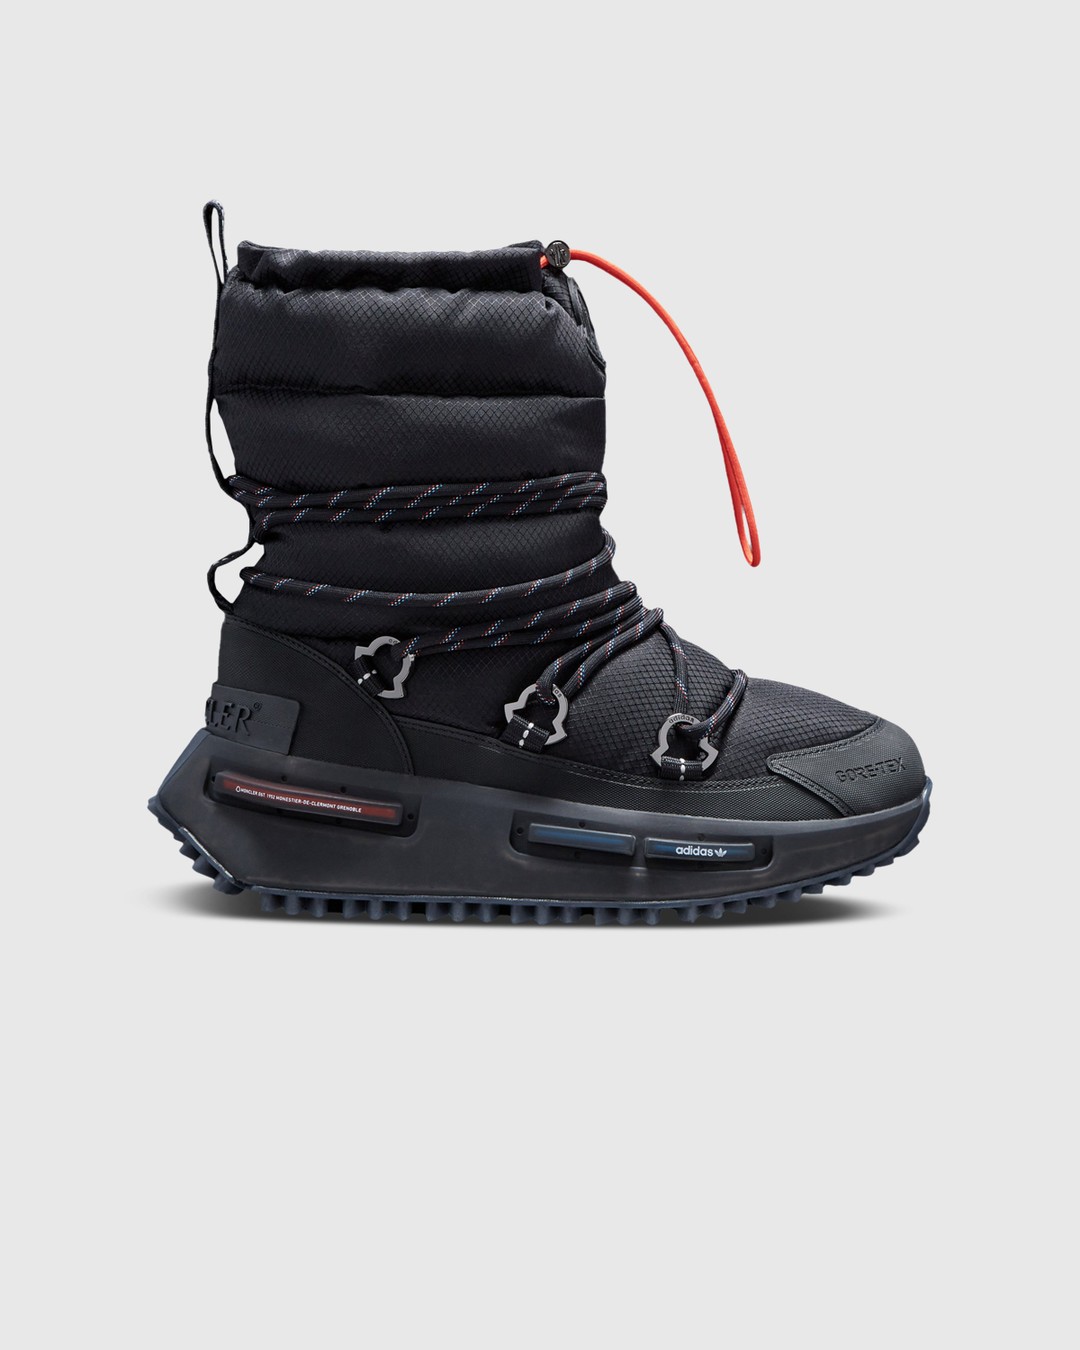 adidas Originals x Moncler – NMD Mid Ankle Boots | Highsnobiety Shop